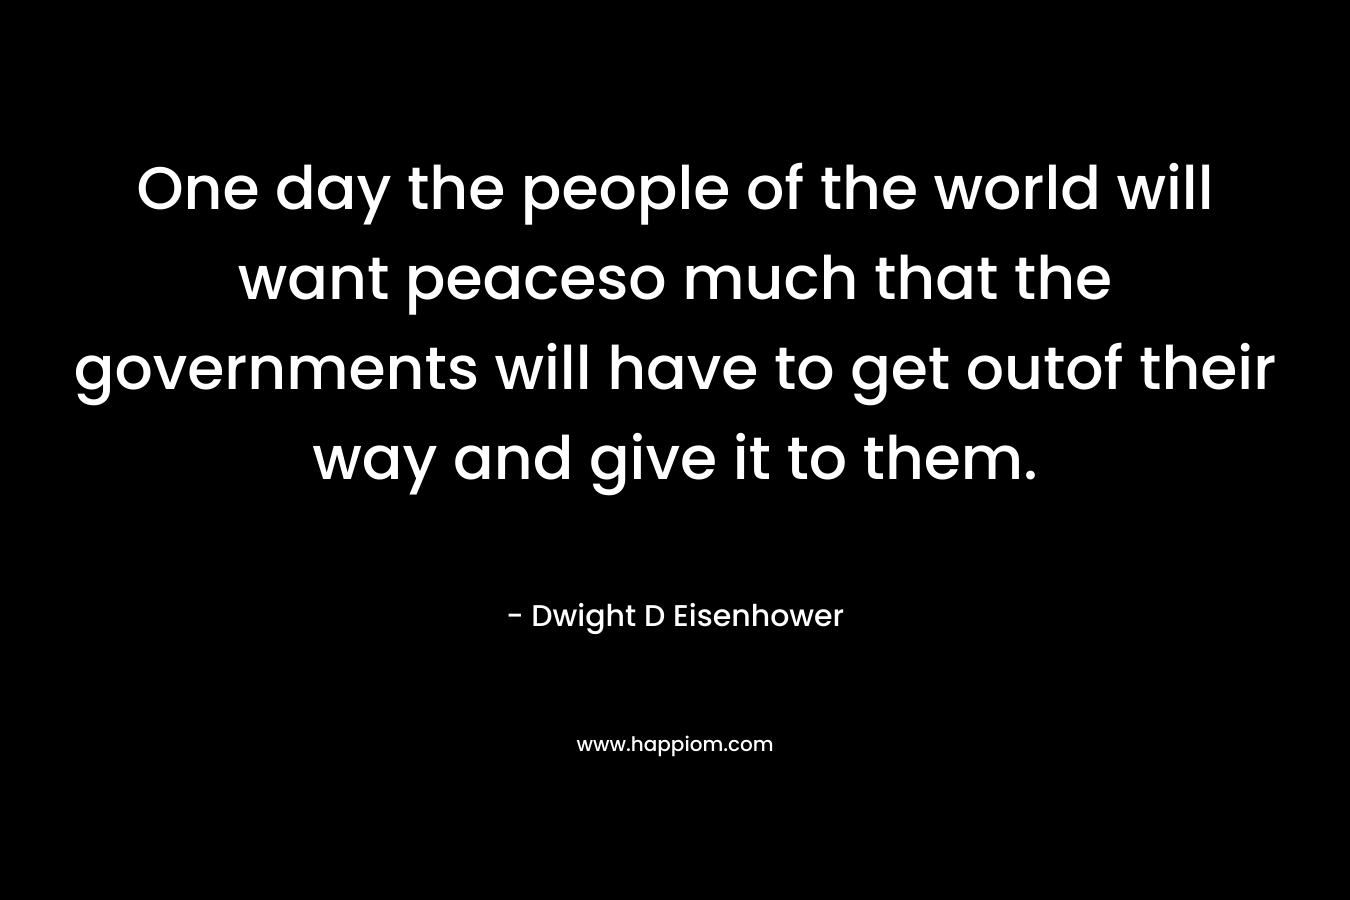 One day the people of the world will want peaceso much that the governments will have to get outof their way and give it to them. – Dwight D Eisenhower